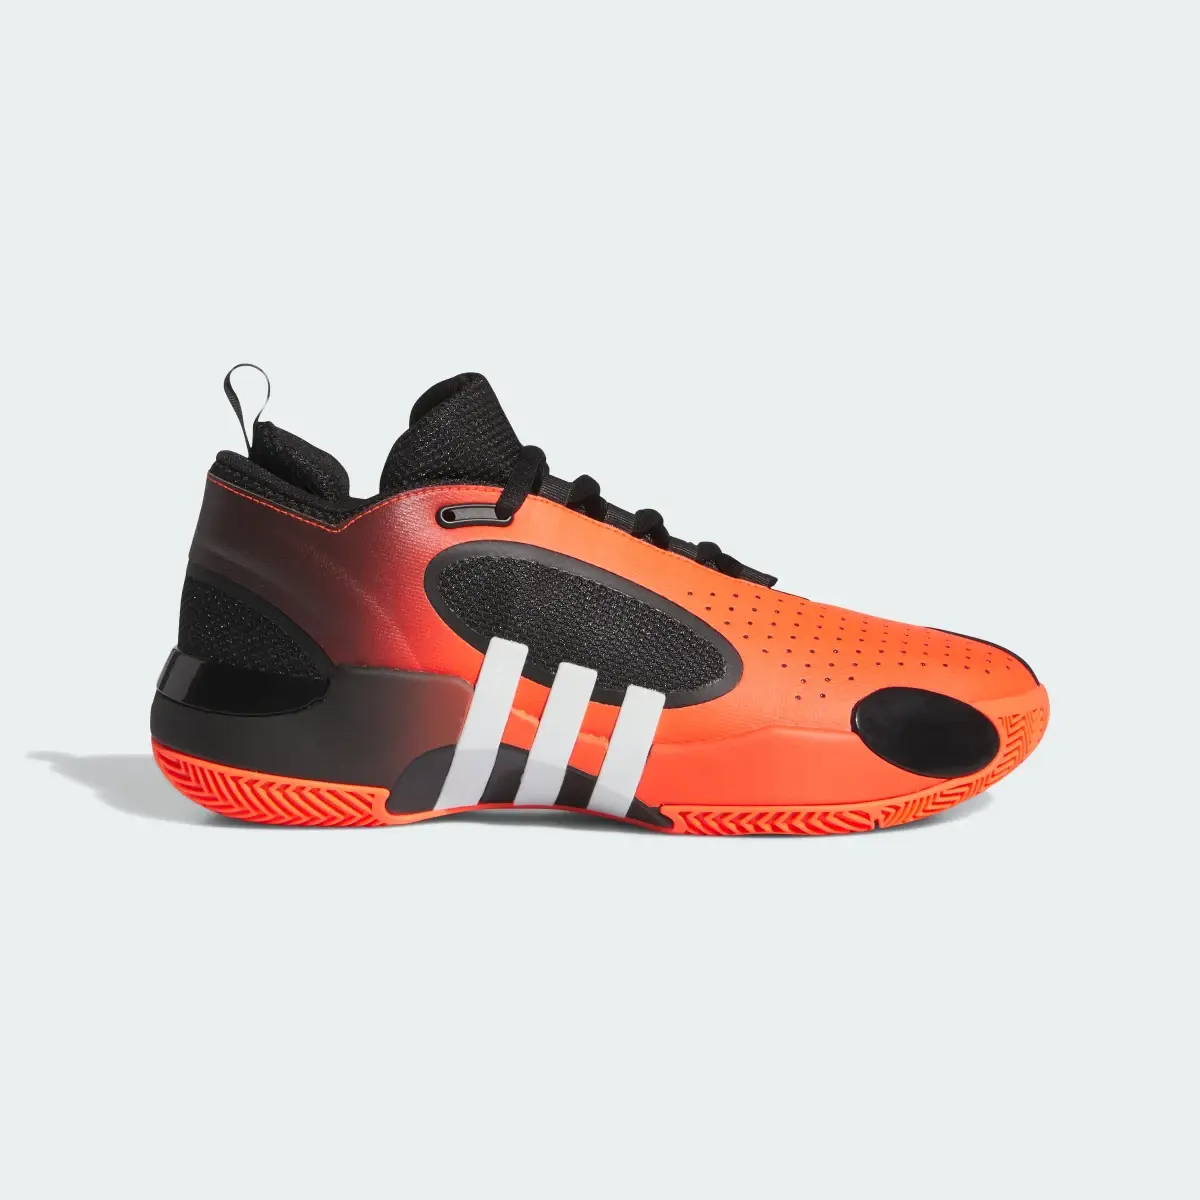 Adidas D.O.N. Issue 5 Basketball Shoes. 2